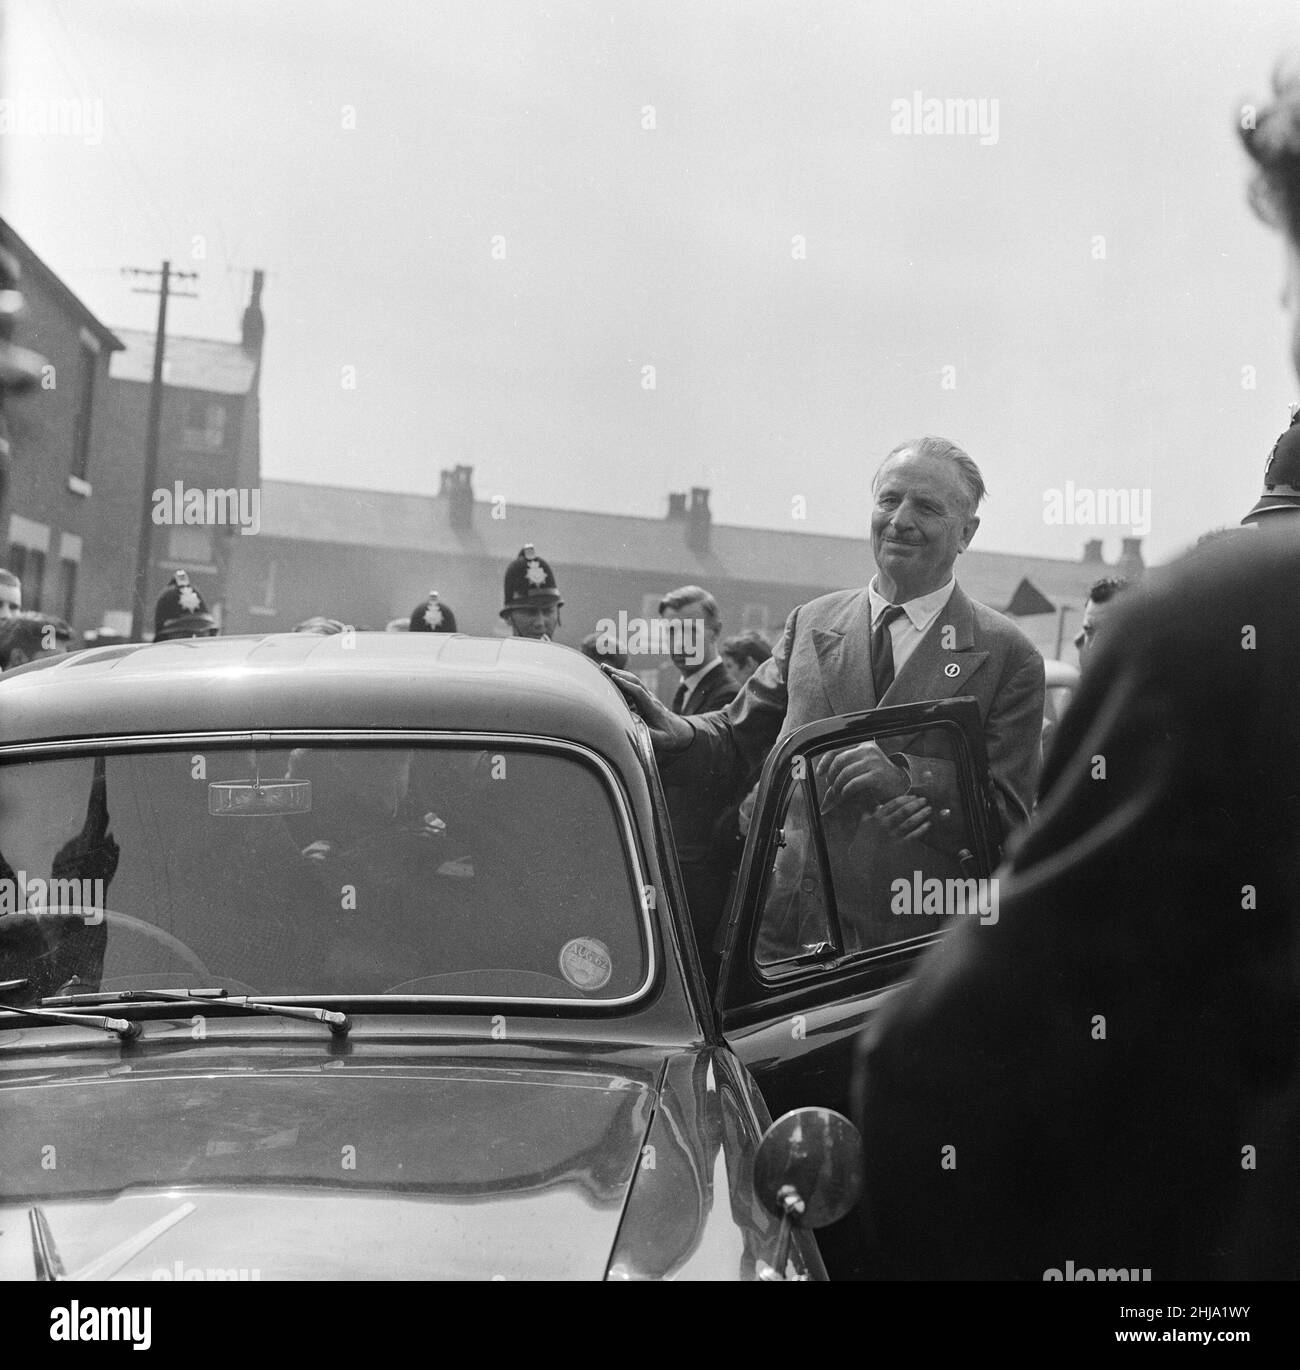 Sir Oswald Mosley visits Manchester to take part in a march organised by his British Union of Fascists supporters, Sunday 29th July 1962. When the eighty marchers gathered, an angry crowd rushed them and Mosley disappeared into a flurry of flying fists and boots and his groups banners were torn to tatters.  Police broke up the fighting mob and rescued 65-year-old Mosley but the march soon turned into a riot causing a mile of terror with fights breaking out every few yards. Many marchers fell out with bleeding faces and torn clothes. The rest were pelted with stones, coins, cabbages, tomatoes a Stock Photo